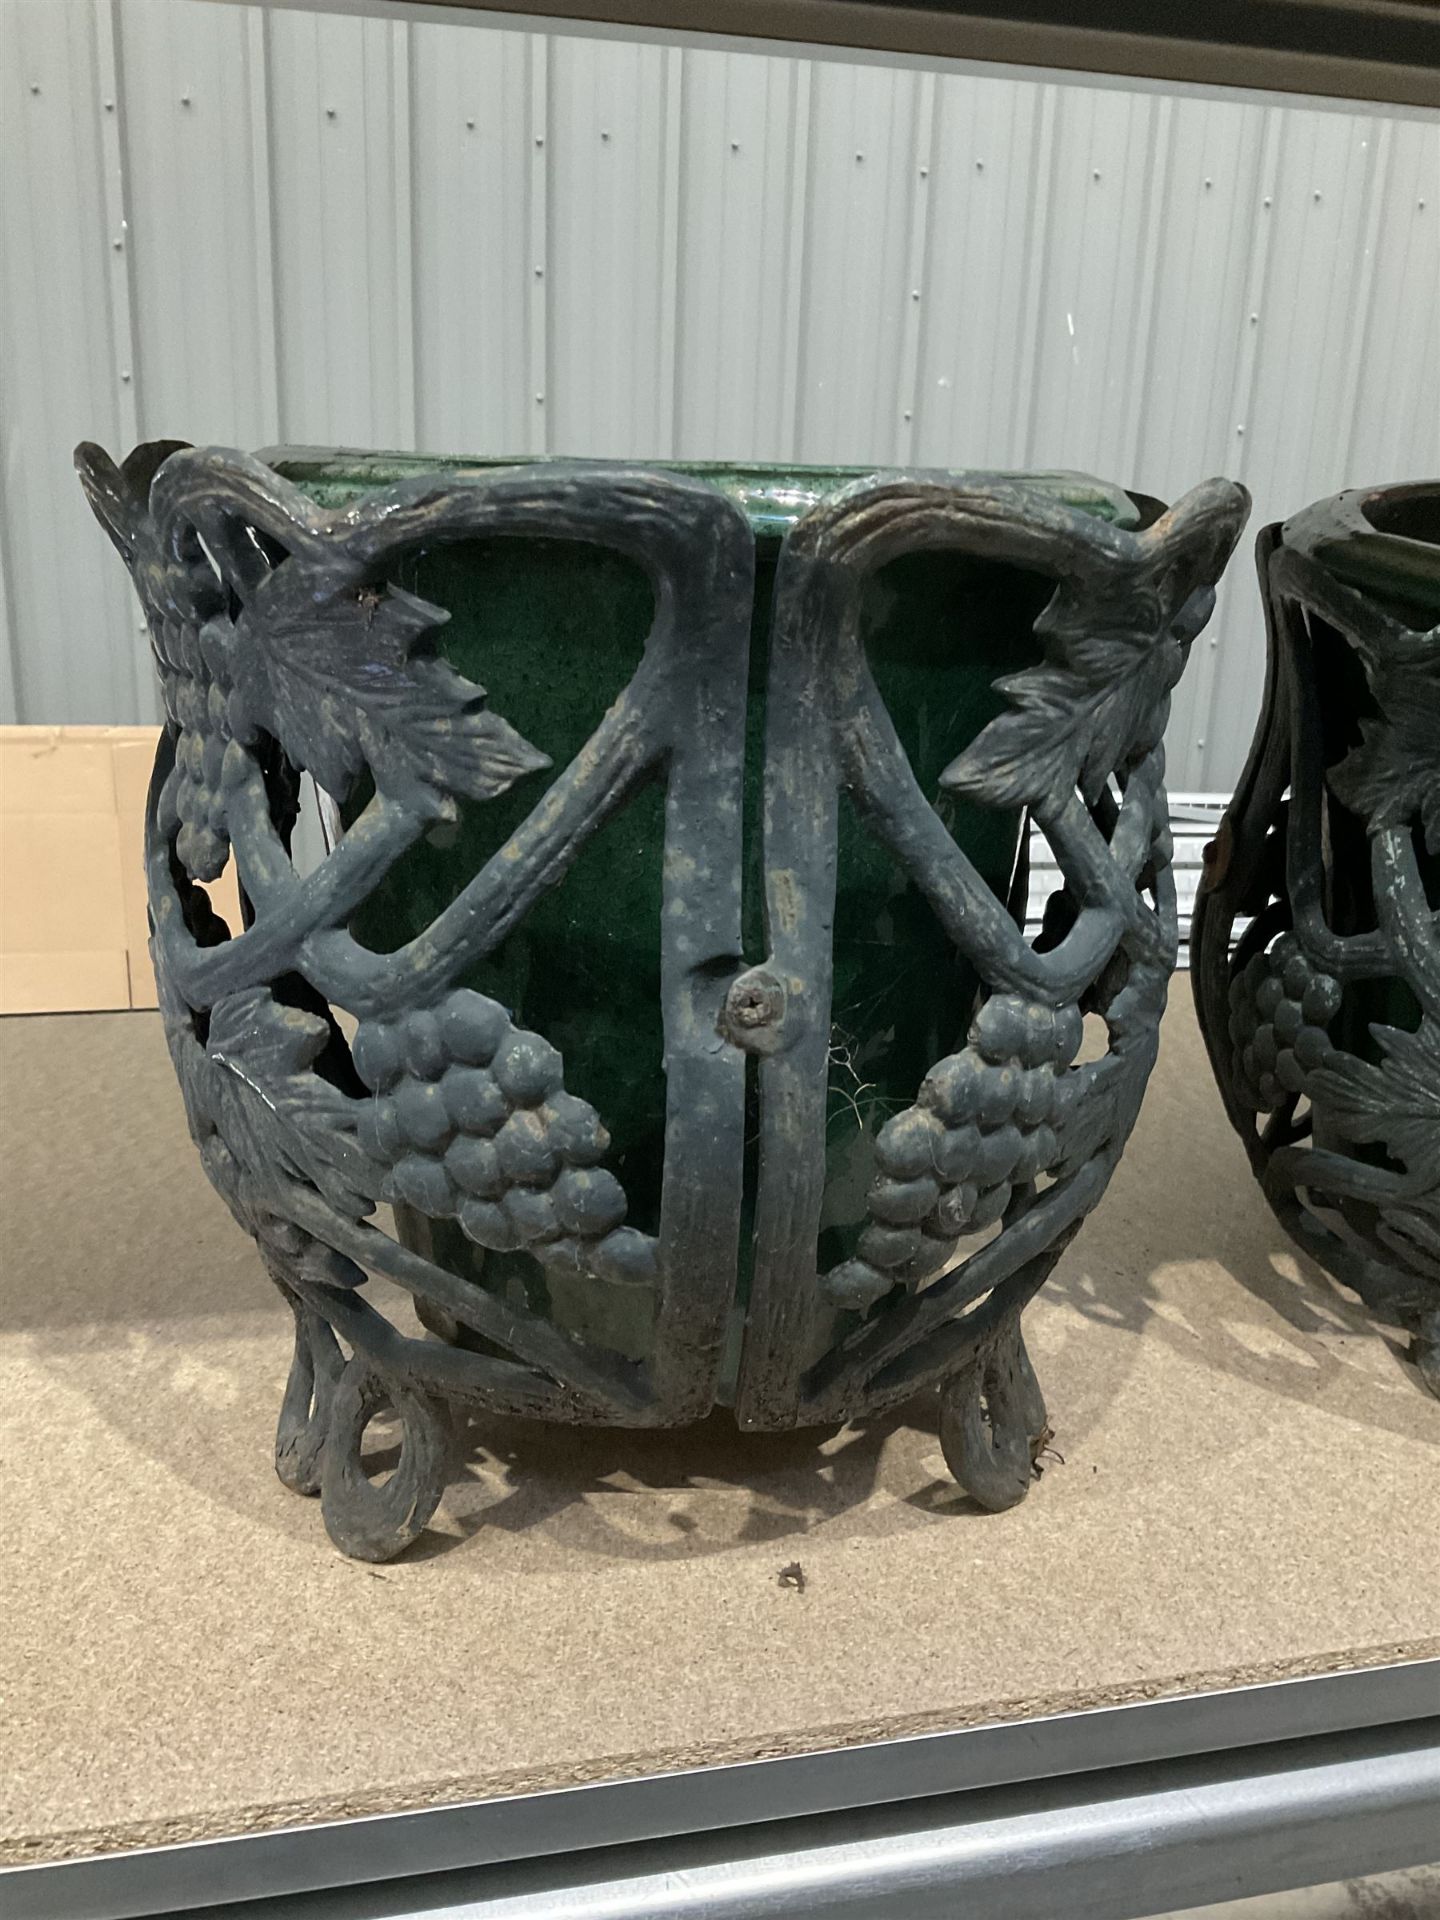 Victorian style cast metal planter/pot holder with three inserted terracotta glazed pots - Image 5 of 5